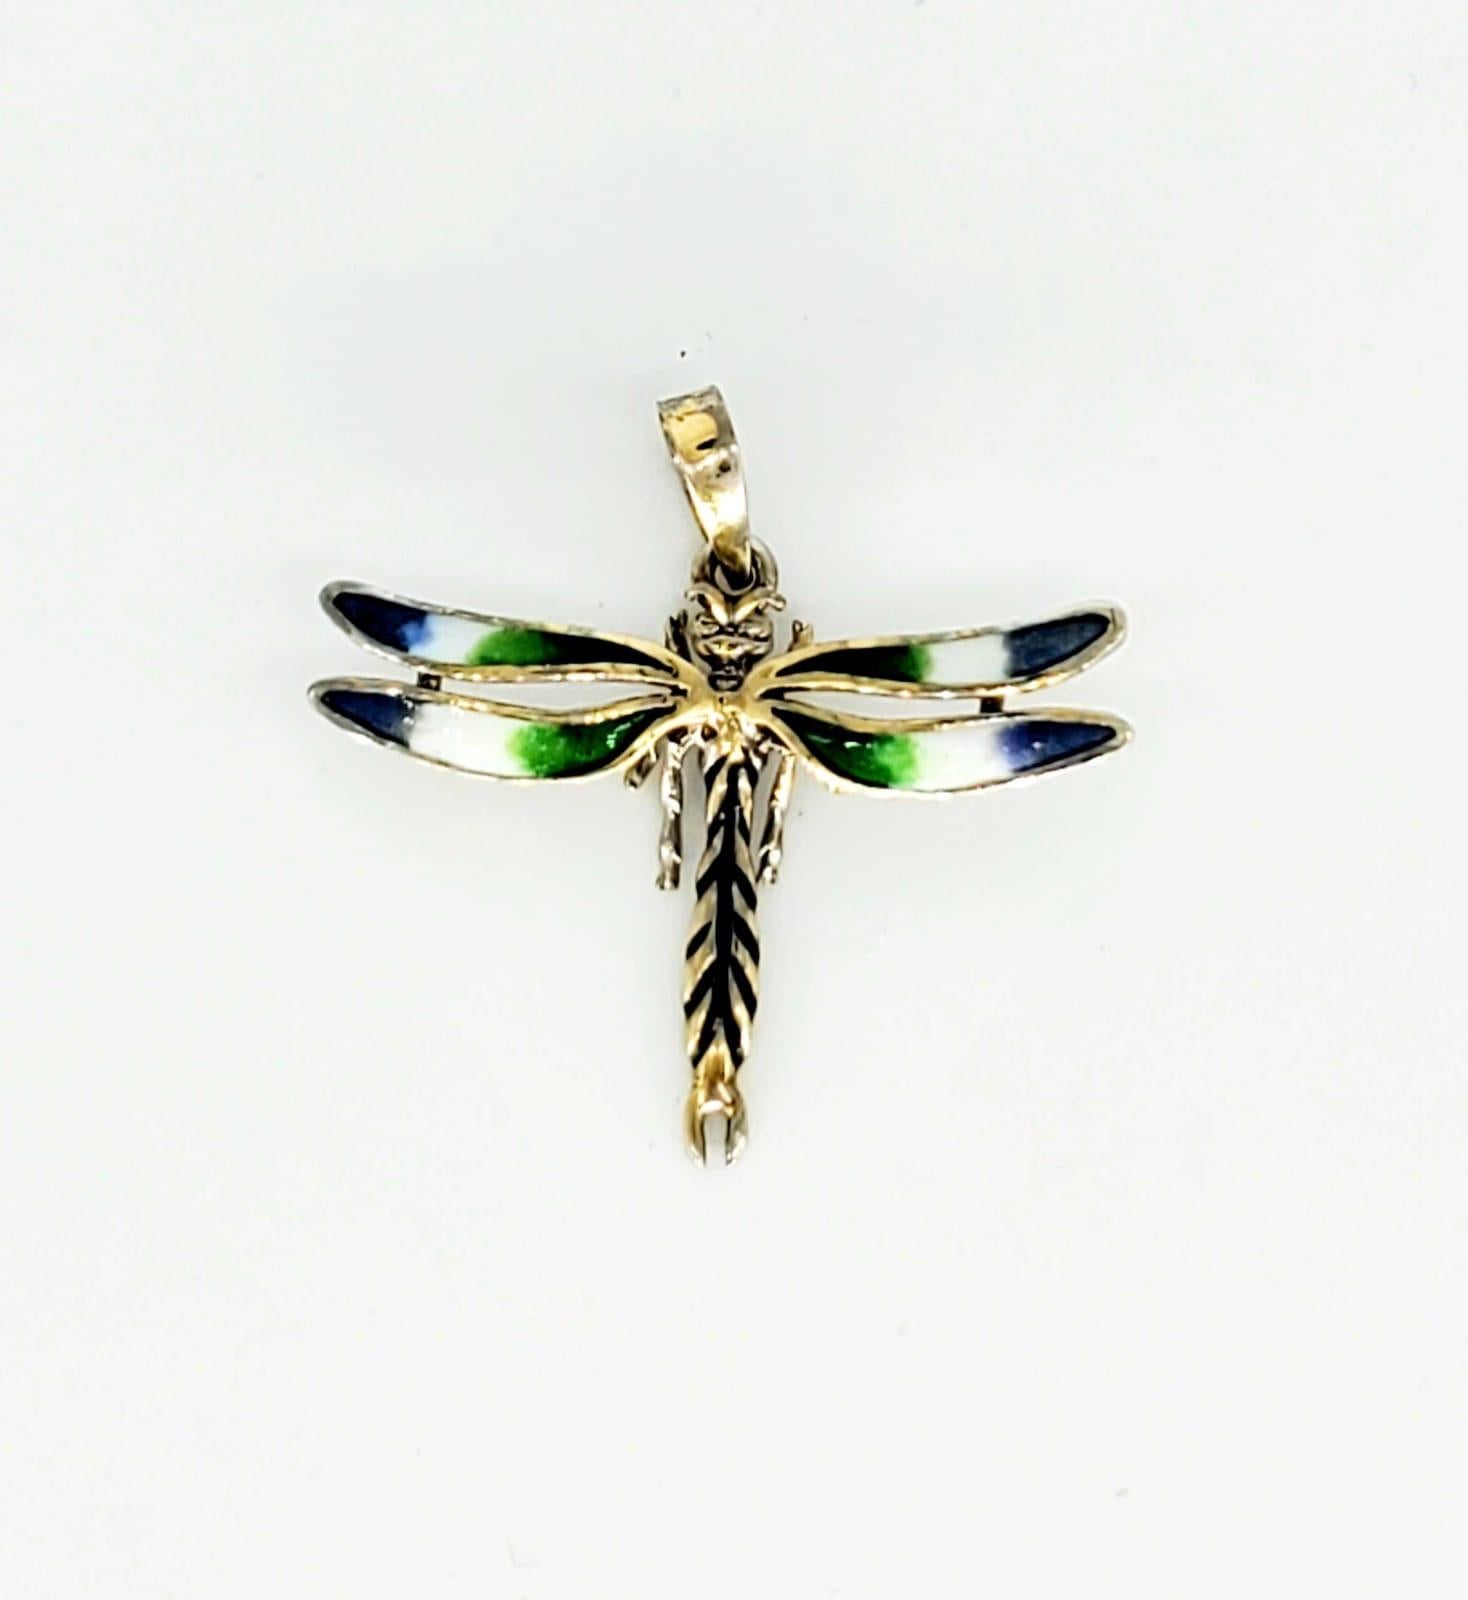 Vintage Enameled Dragonfly Pendant 14k Gold. The pendant measures 1.24”x1.10” and weights 2.6 grams.